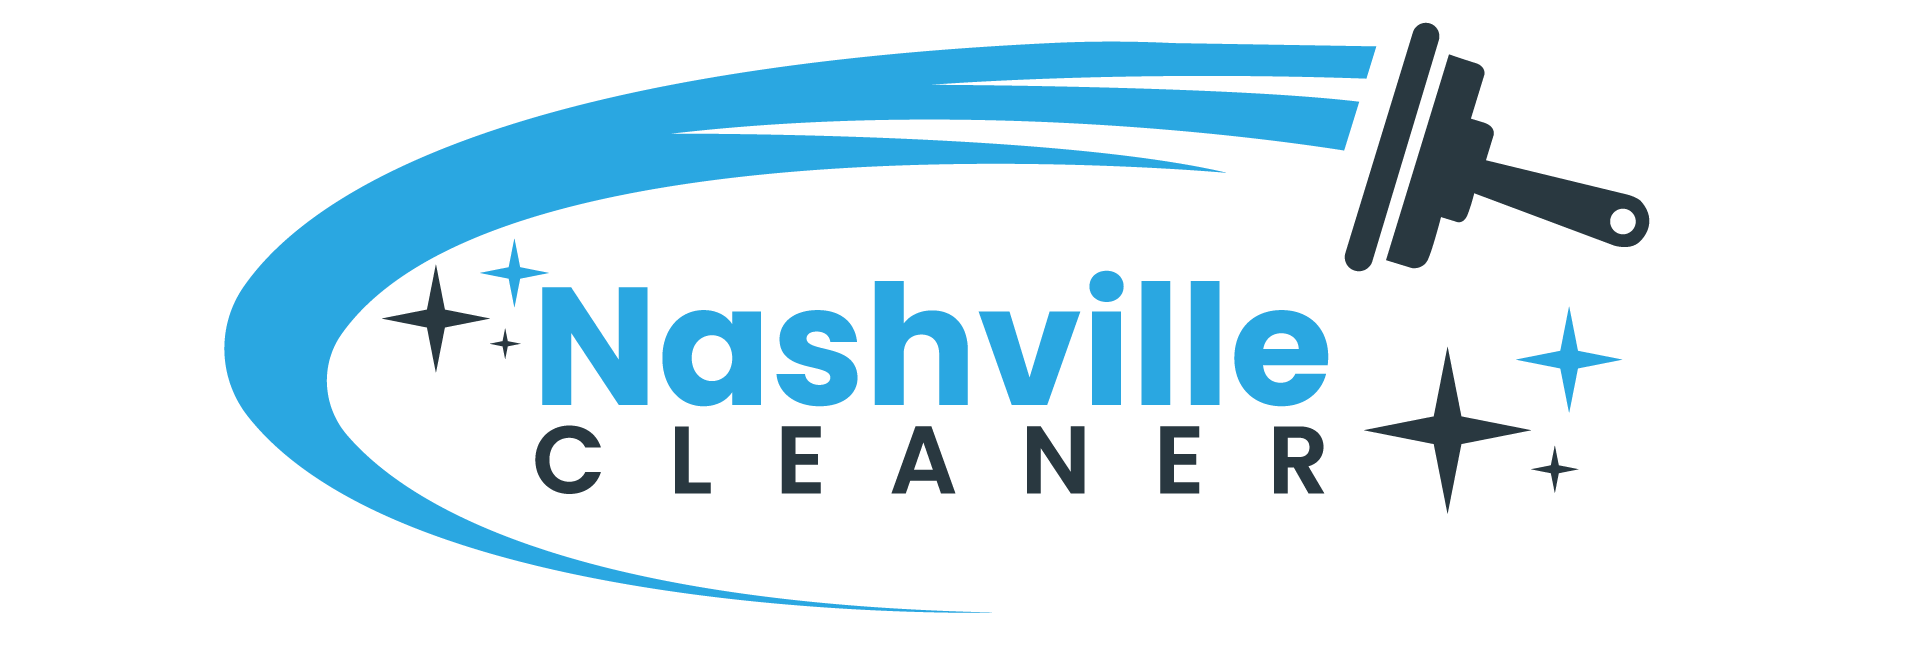 Nashville Cleaner | Cleaning Services | Janitorial | Pressure Washing